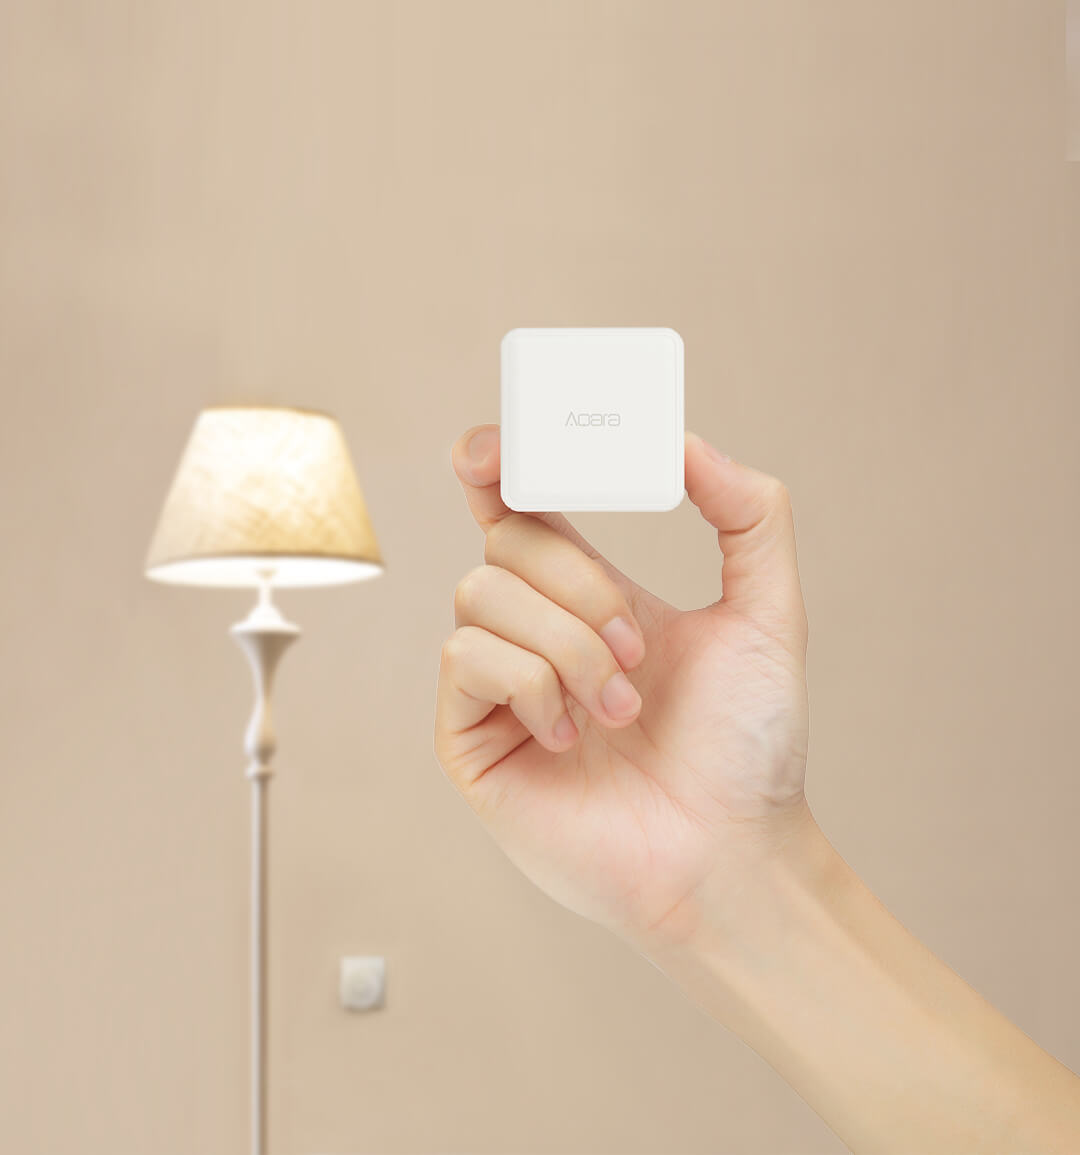 Aqara LED Light Bulb Works with More Smart Devices to Enrich Your Daily Life